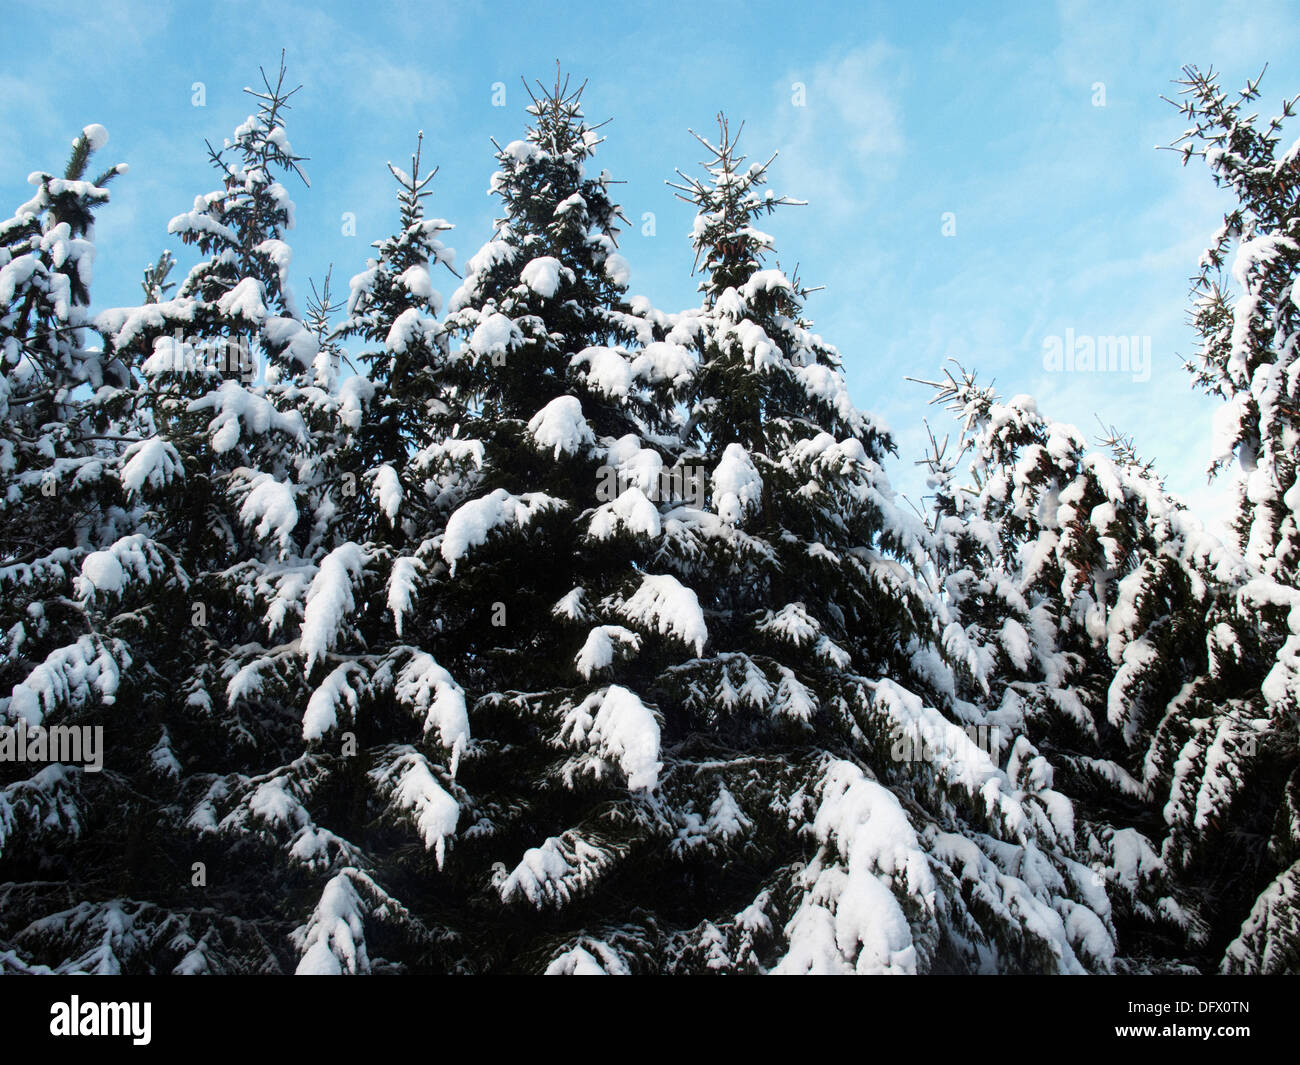 Spruce Trees Covered with Snow, Low Angle View Stock Photo